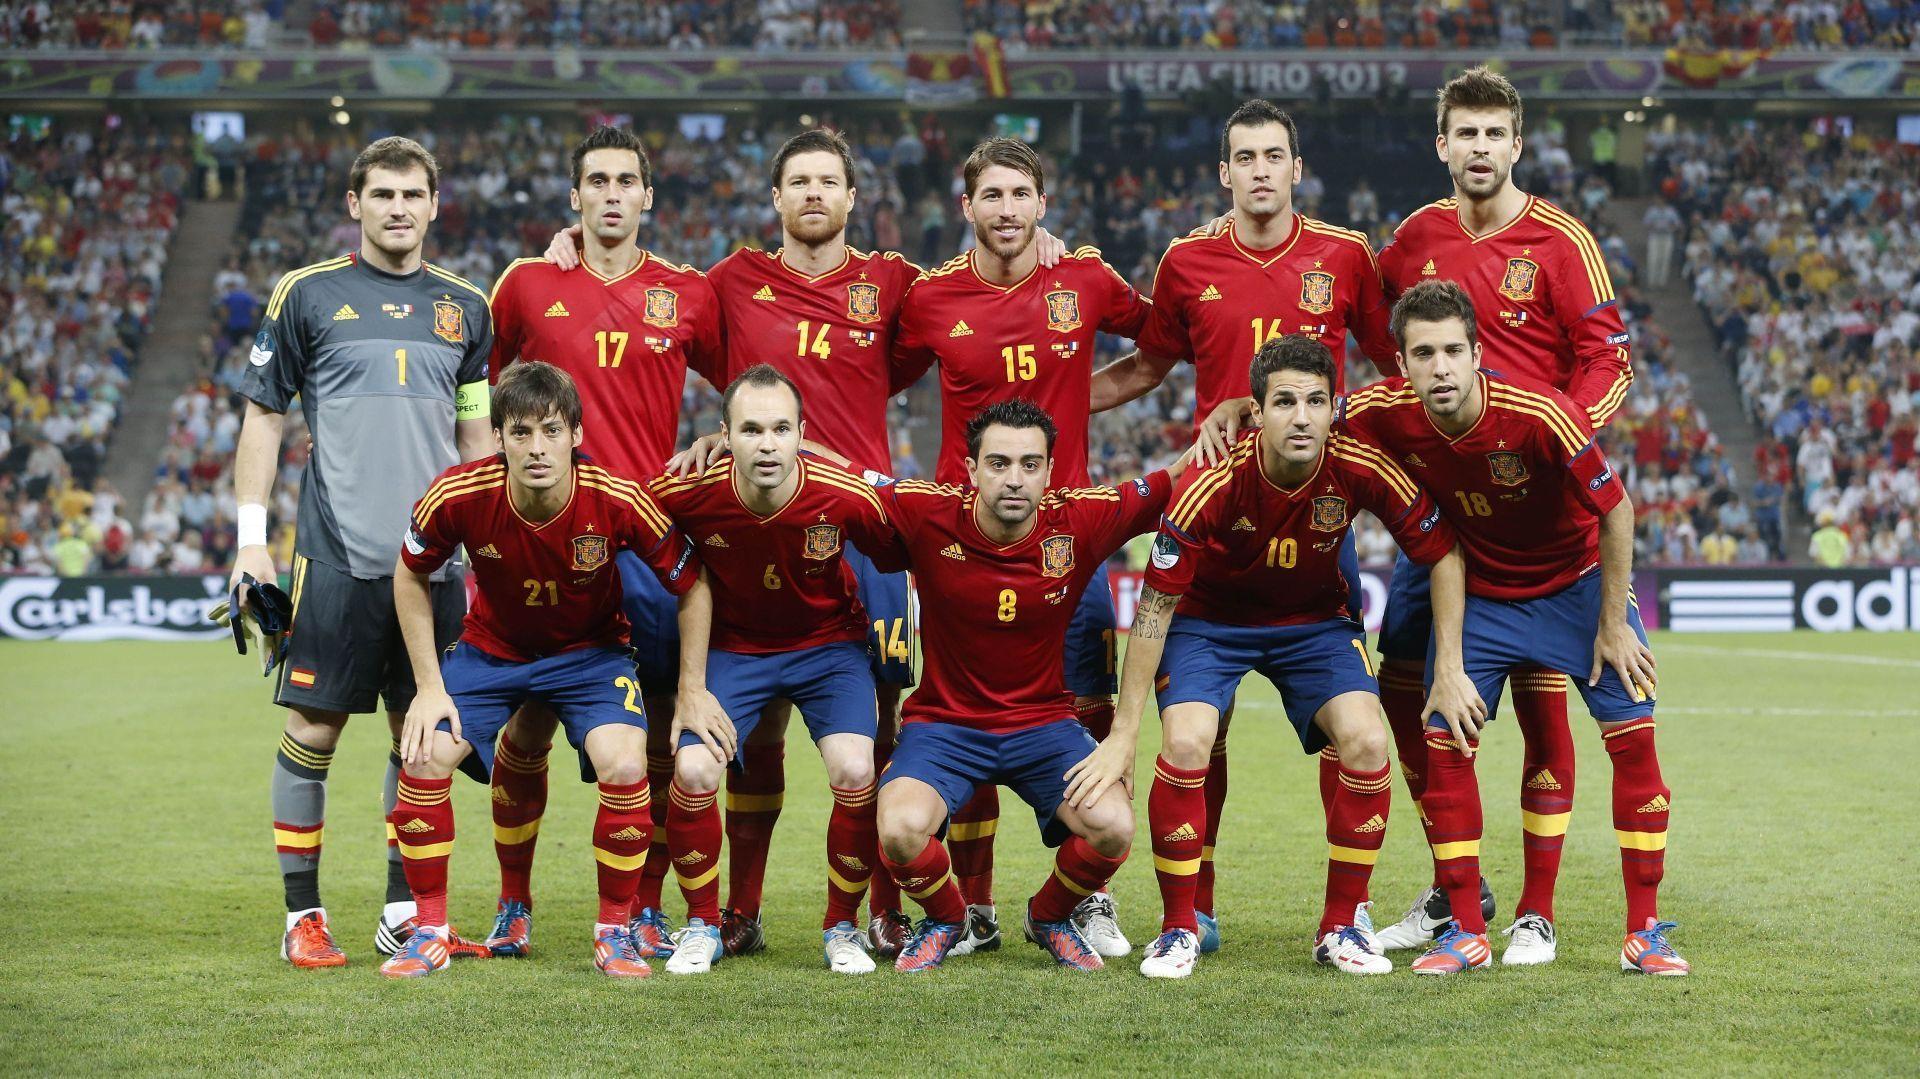 Spain National Football Team 2014 Wallpaper Picture Spain